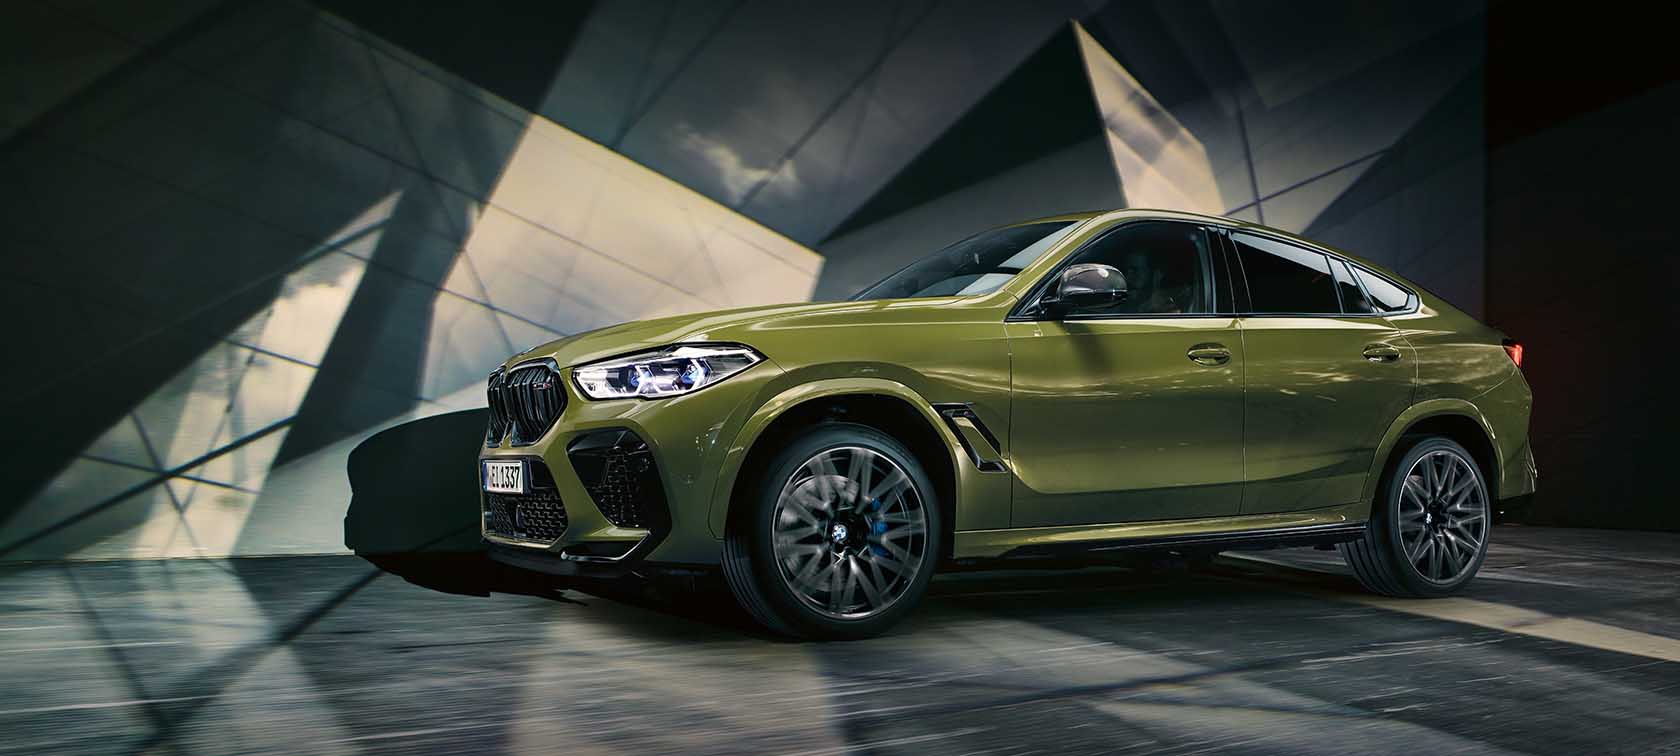 BMW X6 M Automobiles (F96, G06): Models, Technical Data & Prices | BMW.ly